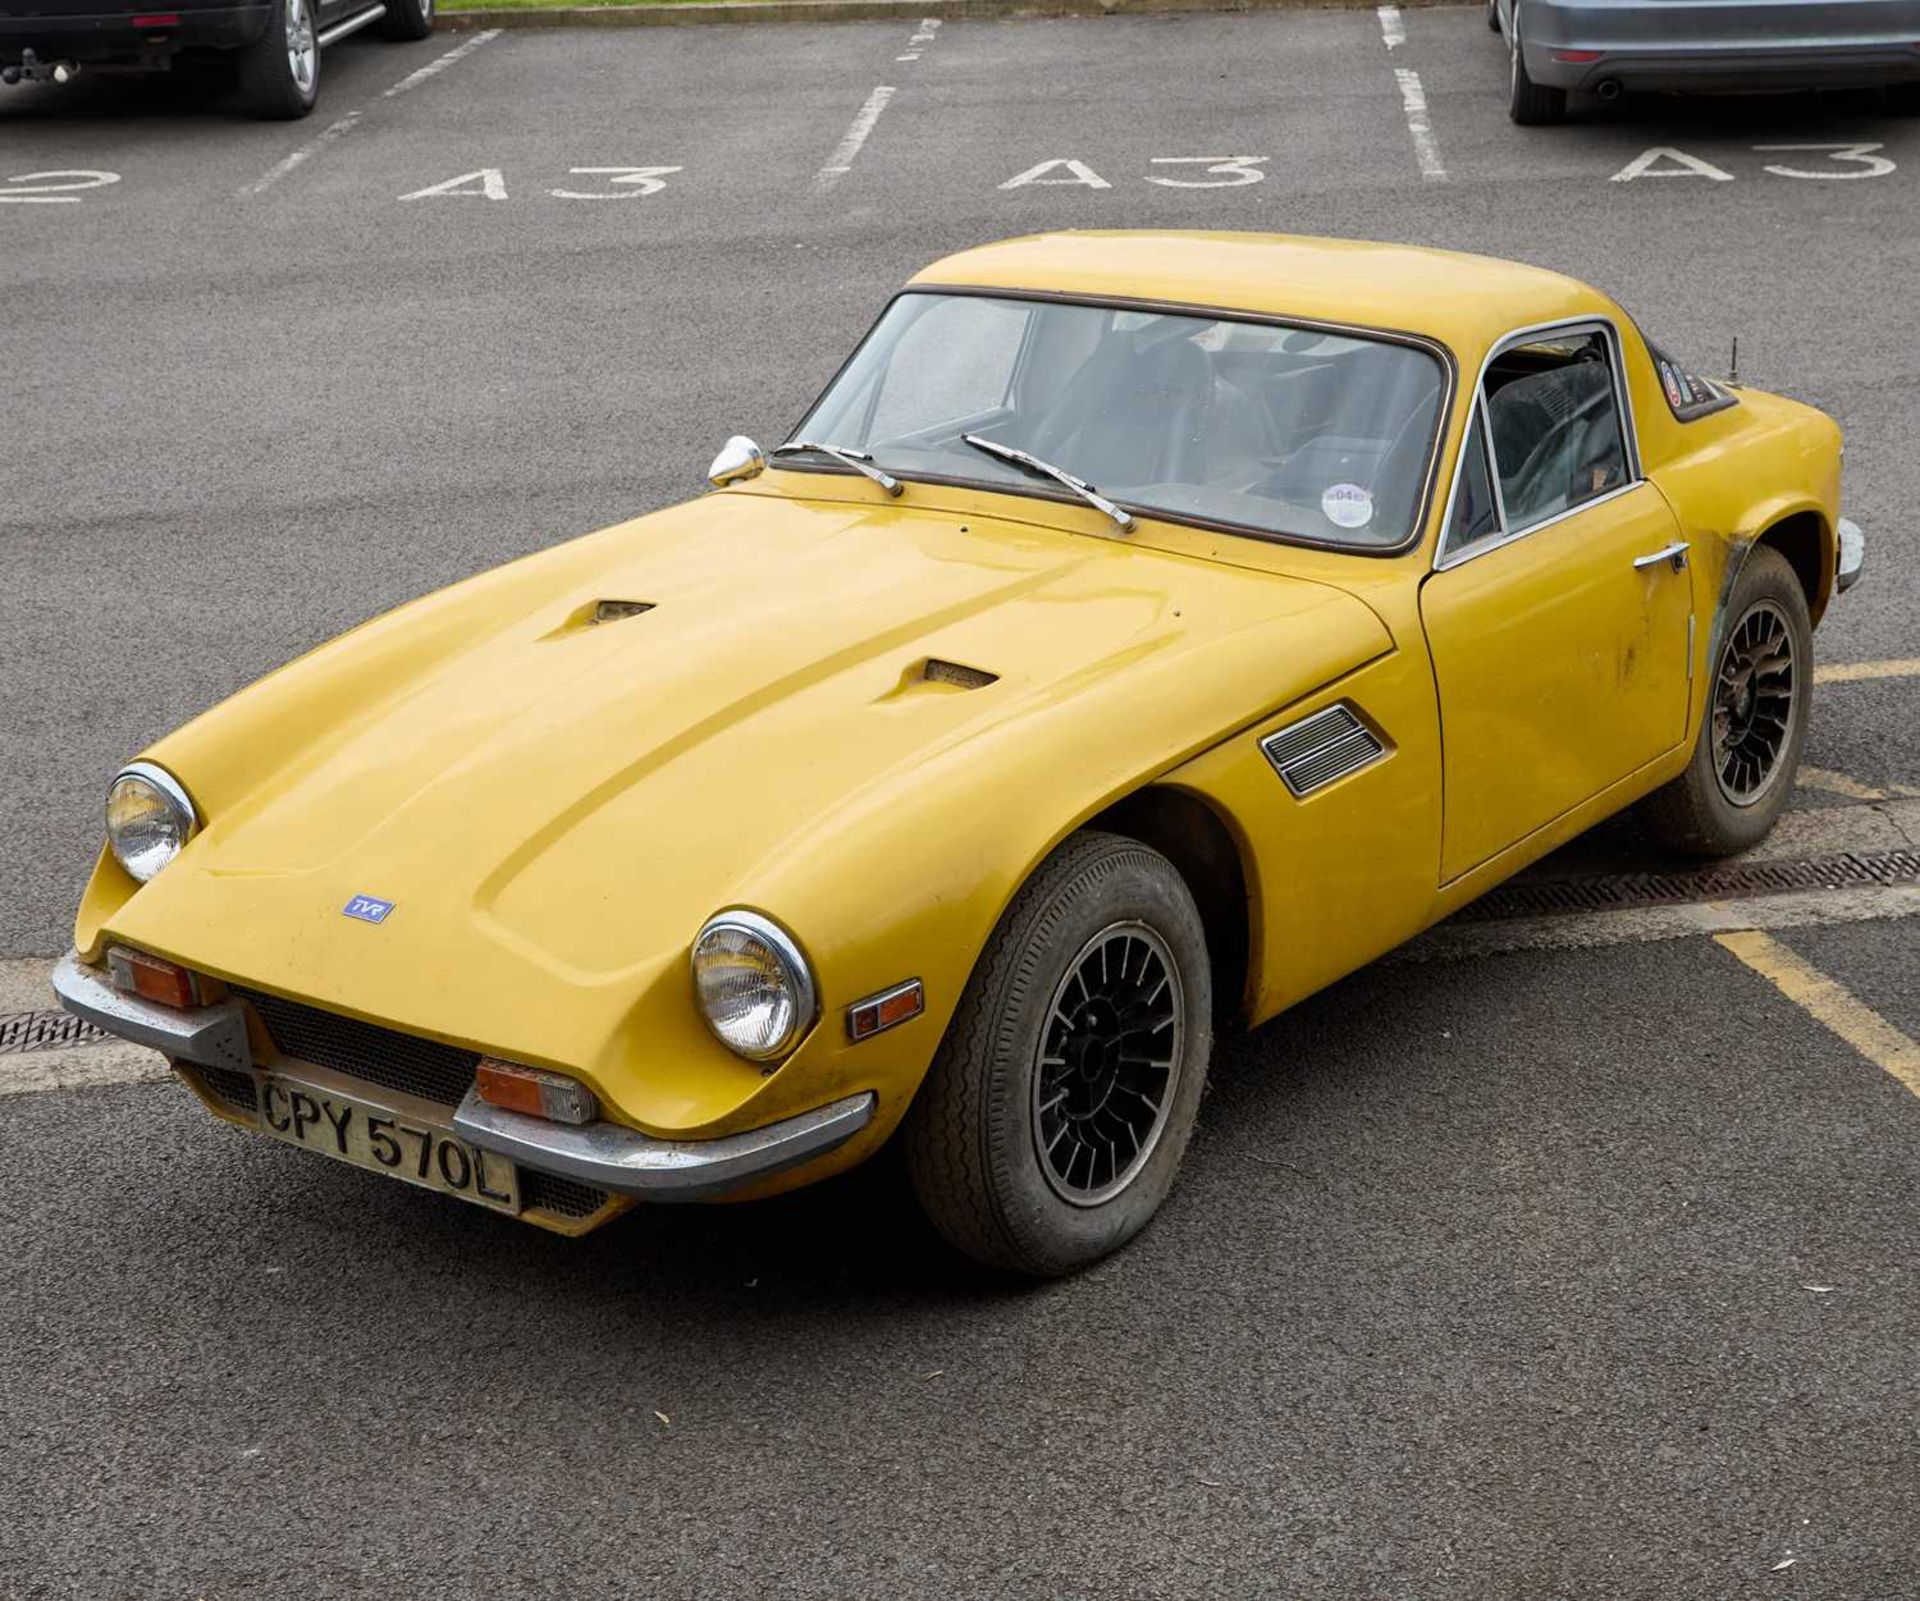 A 1973 TVR - Image 20 of 27